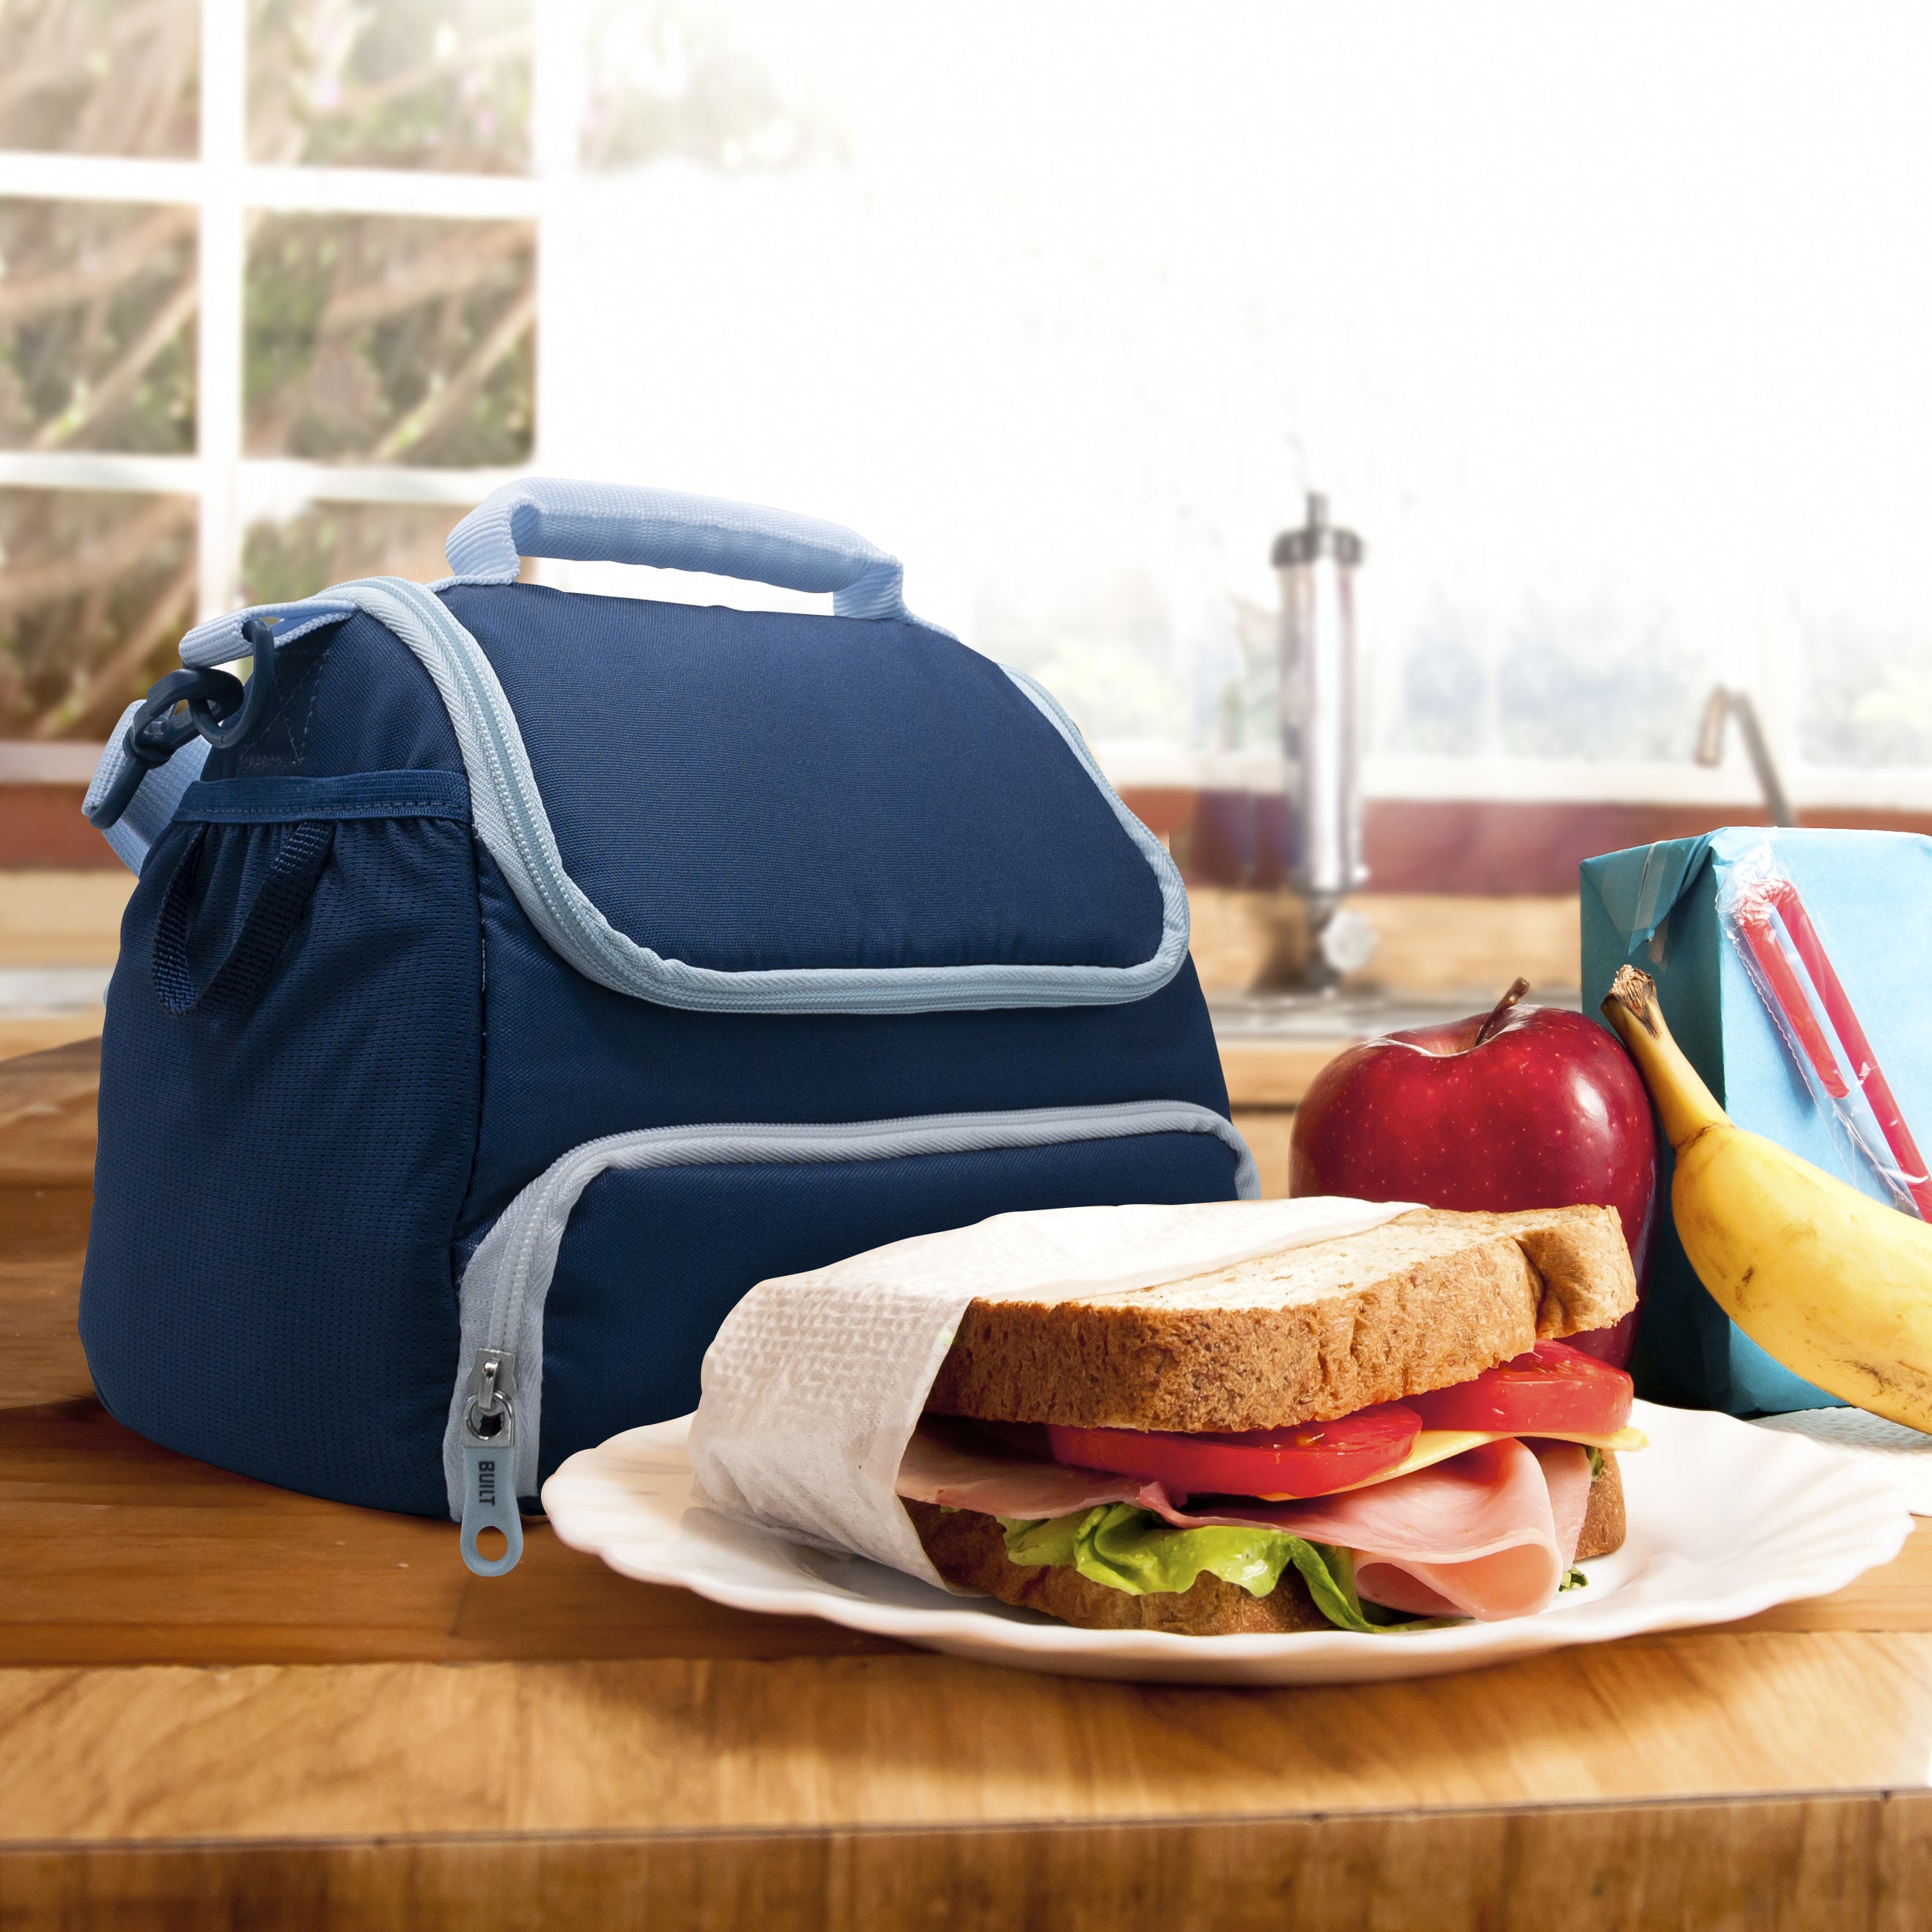 Bentgo Bag - Insulated Lunch Box Bag Keeps Food Cold on The Go - Blue